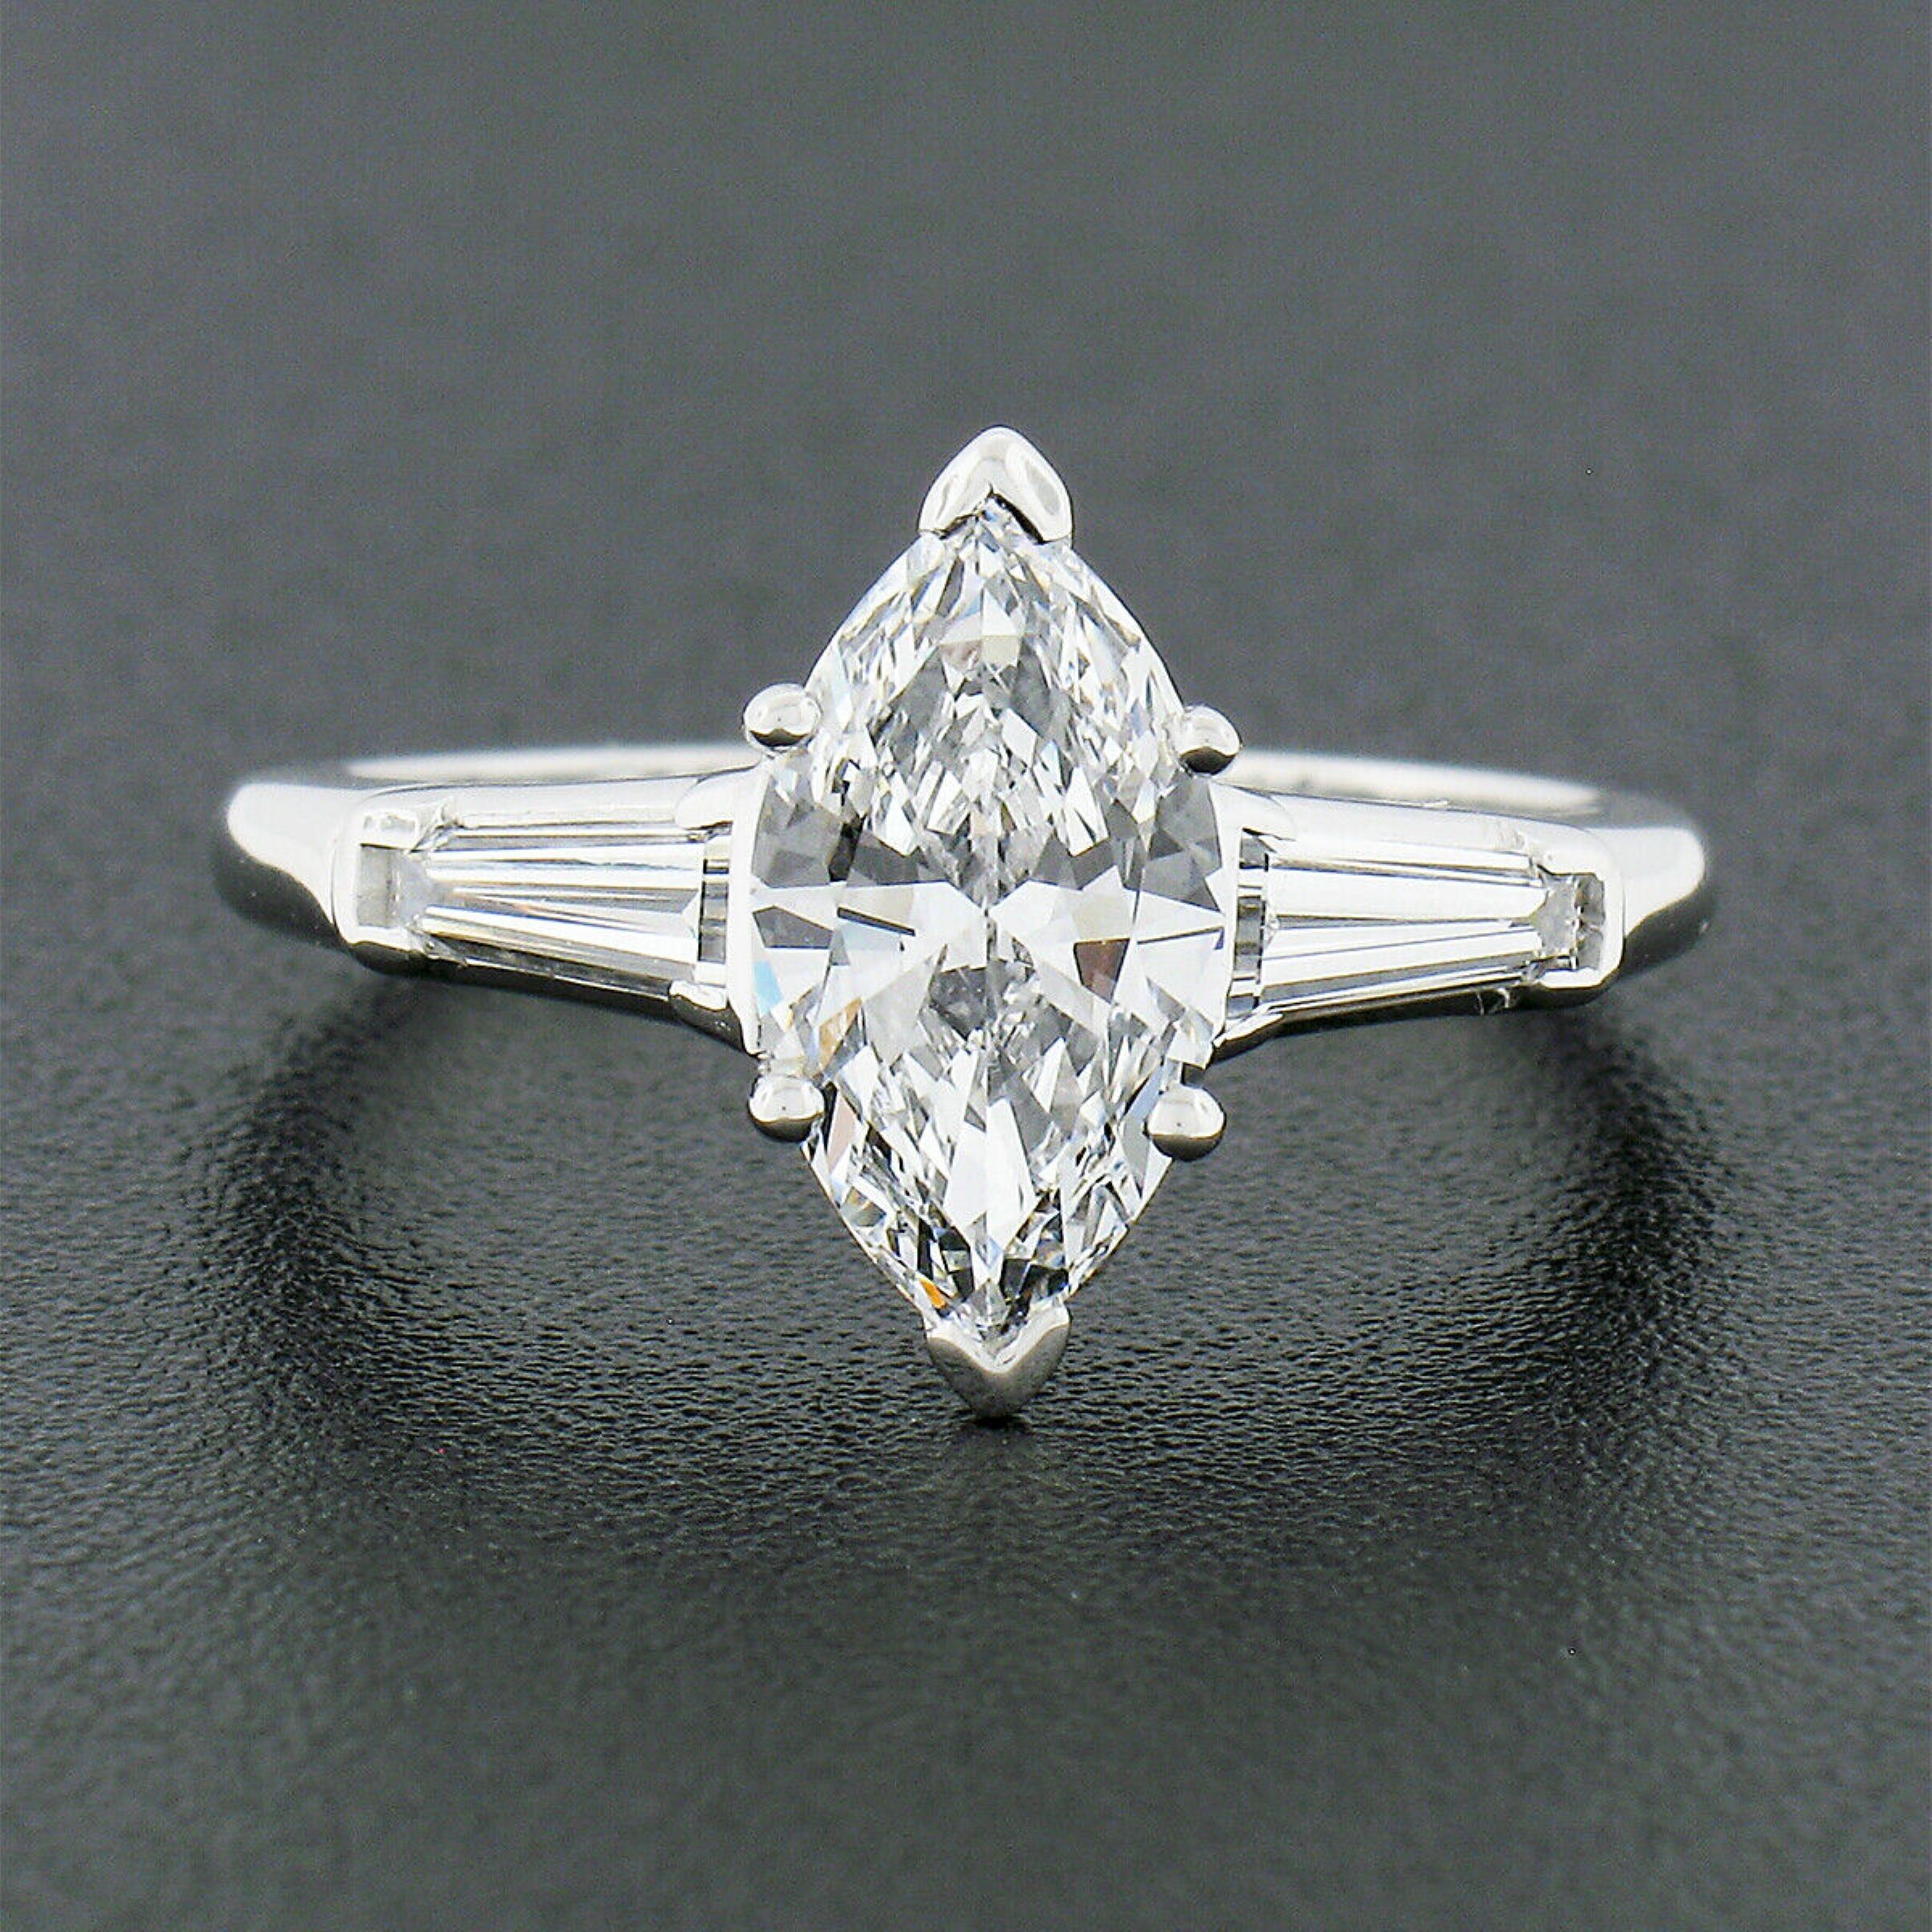 This classy mid-century engagement ring was crafted from solid 900 platinum. The ring features a gorgeous, GIA certified, marquise cut diamond solitaire prong set at its center. That center stone weighs exactly 1.10 carats and is absolutely TOP